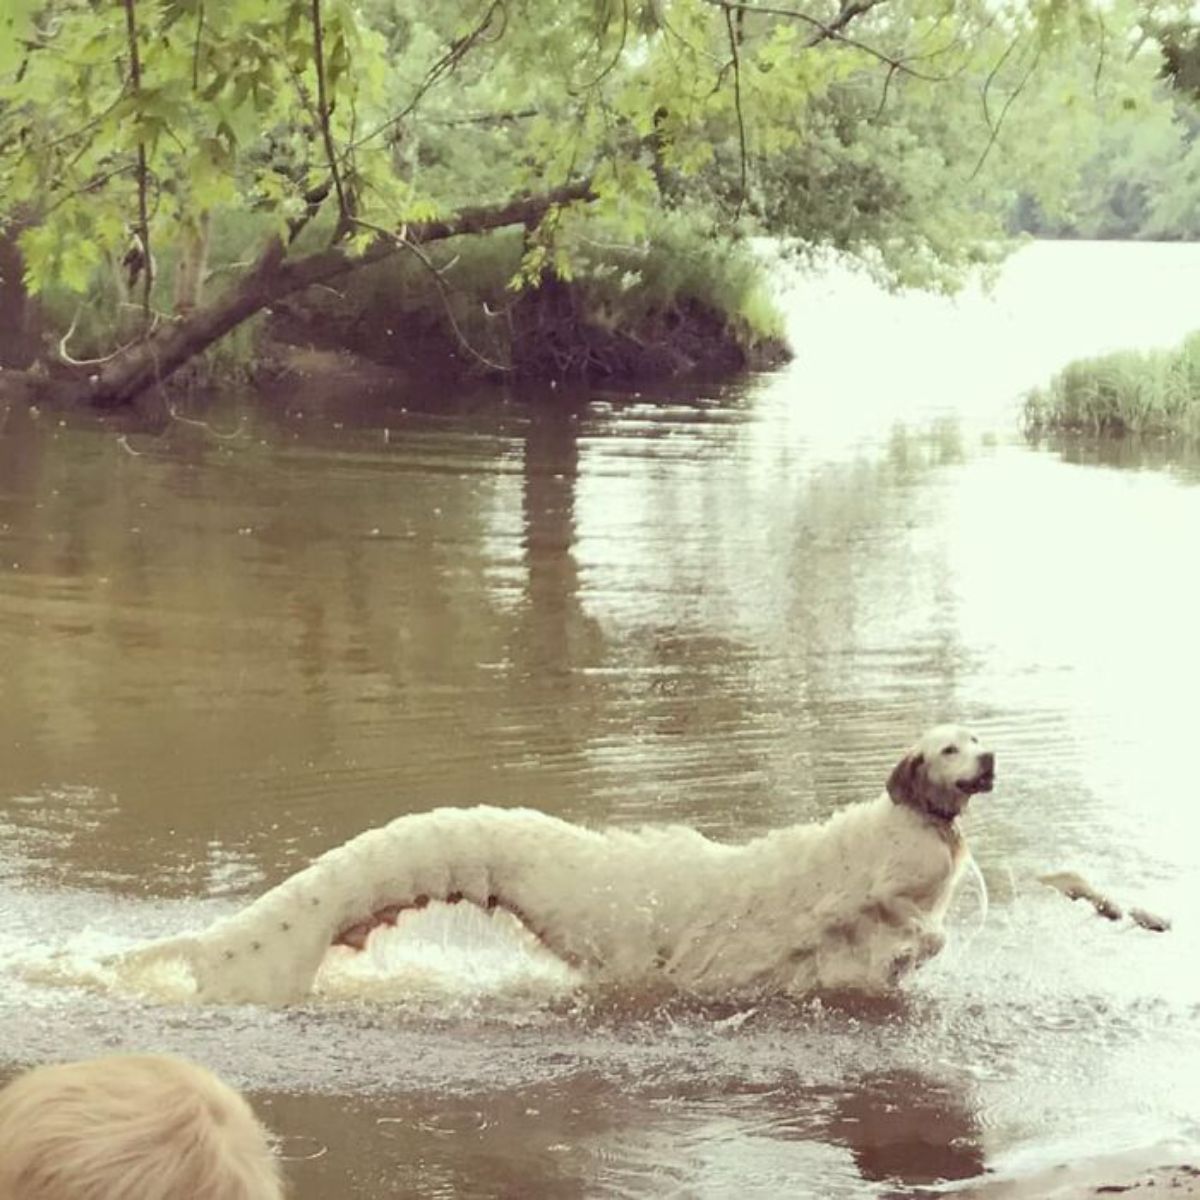 panoramic fail of white dog emerging out of water with a curved body looking like a dragon